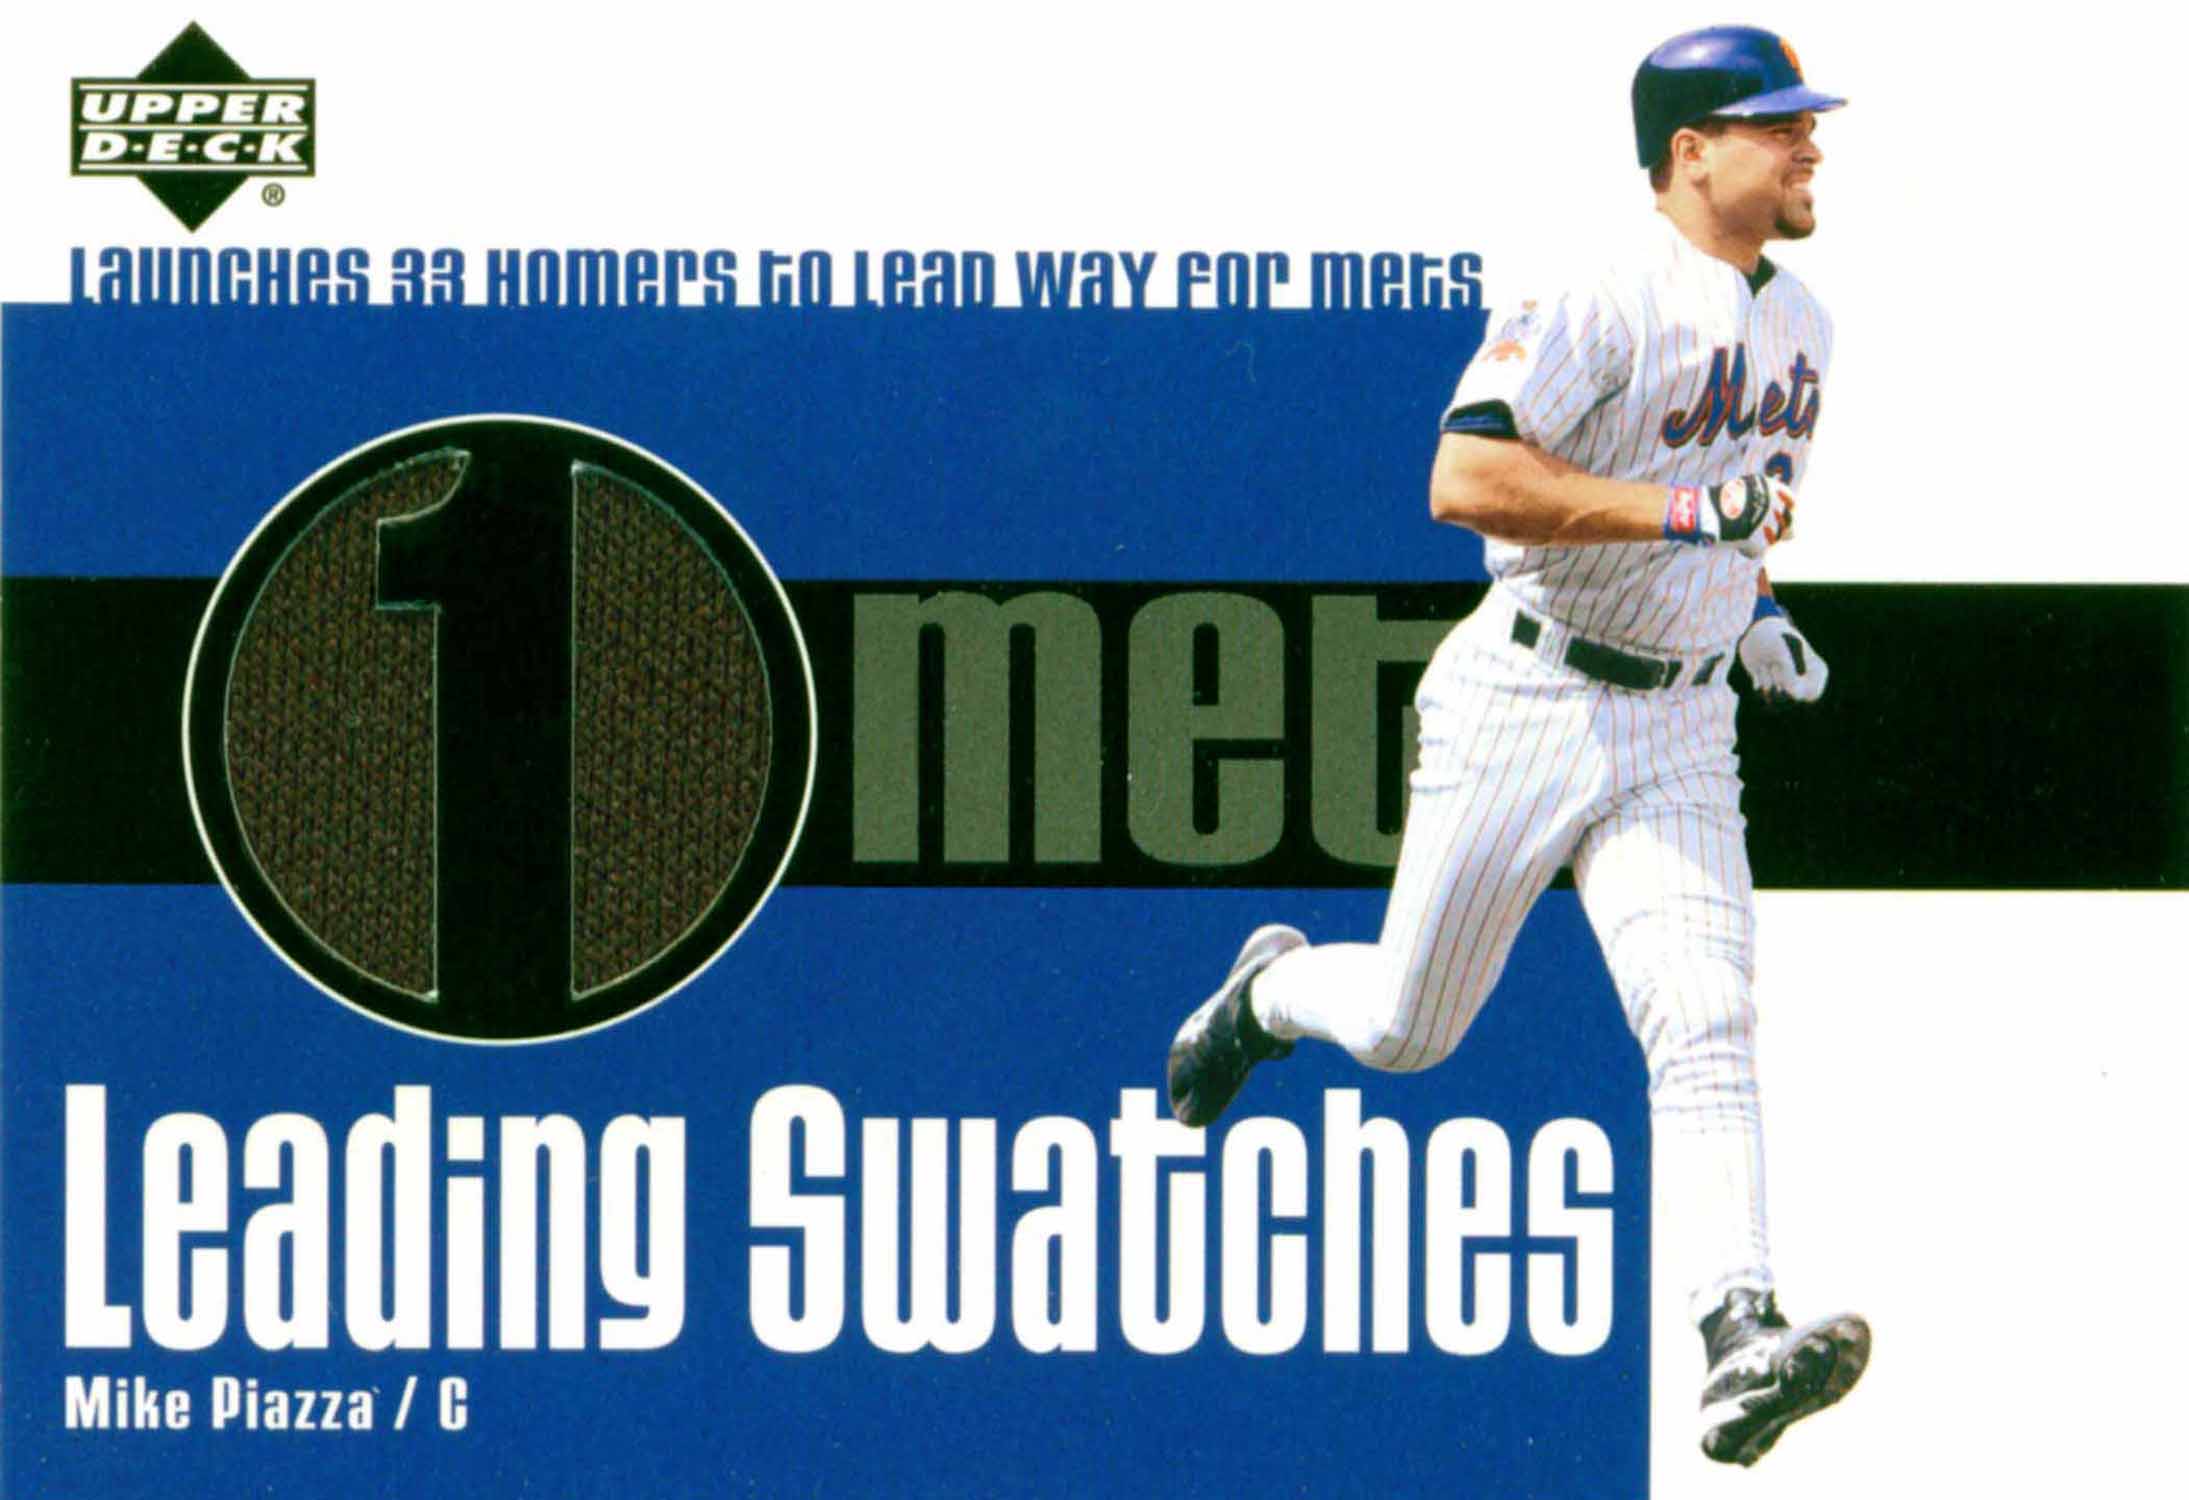 2003 Upper Deck Leading Swatches